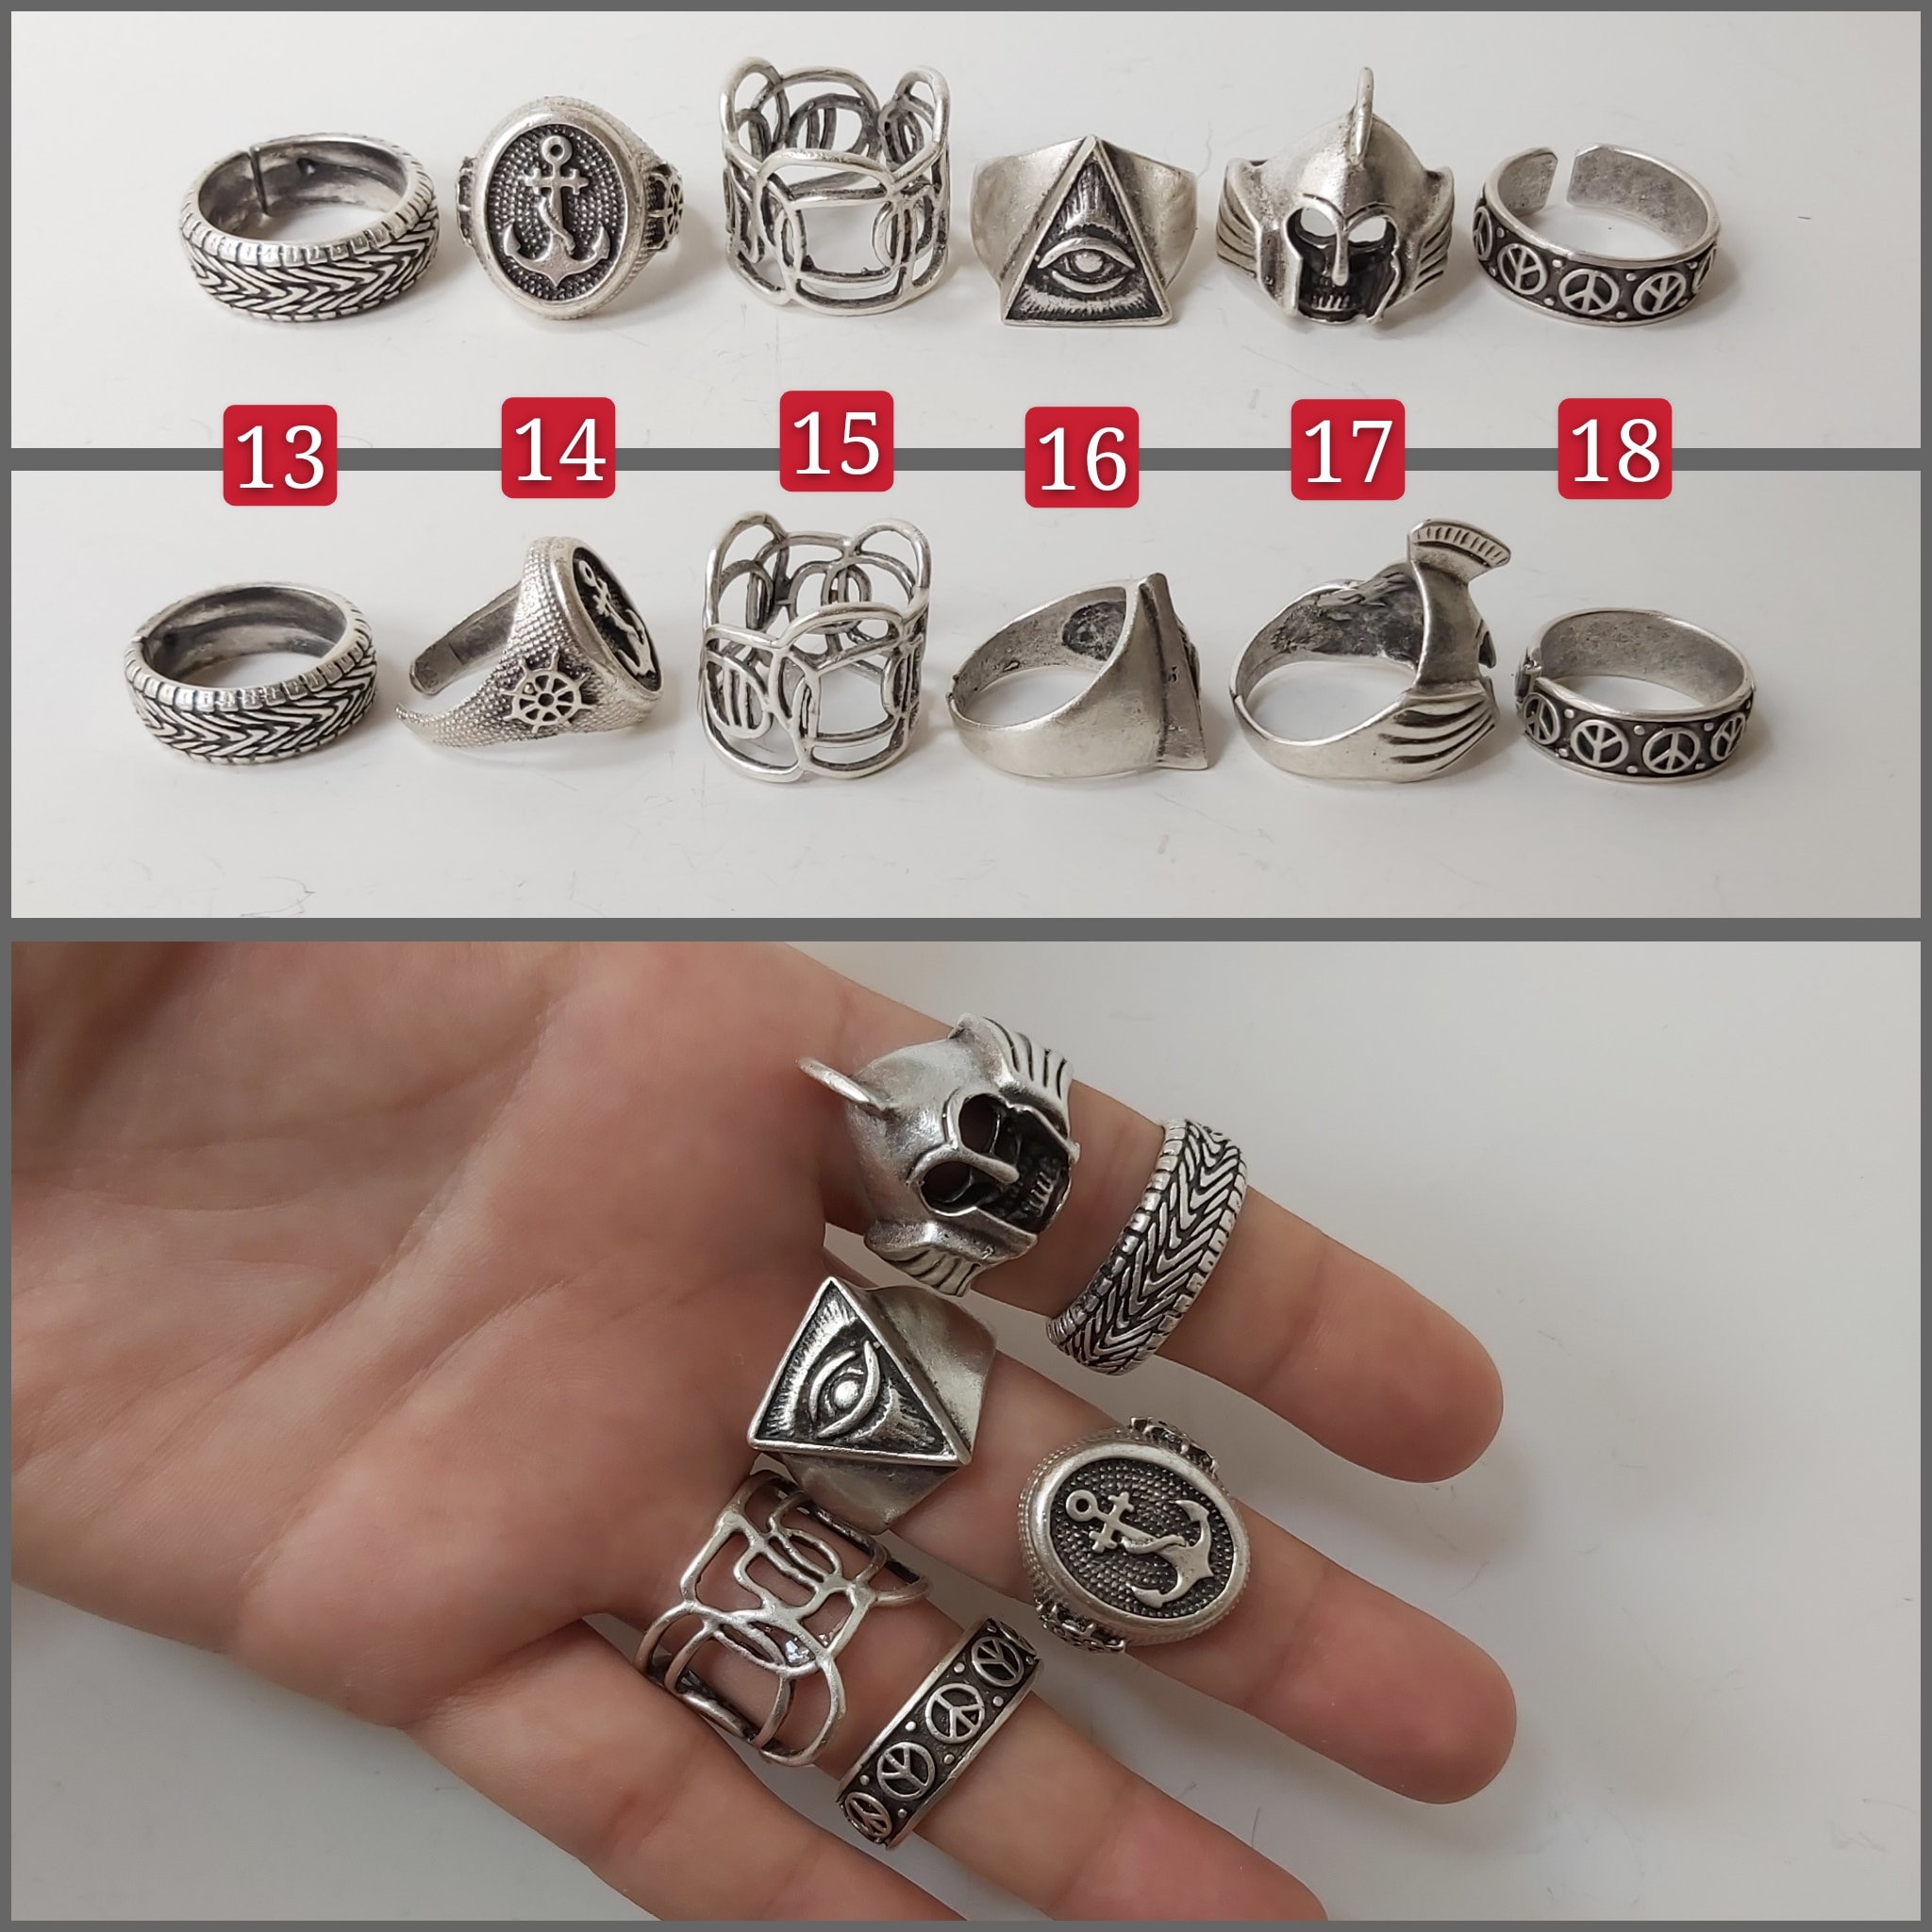 Unique Promise Rings for Men Handcrafted in the USA | My Roots Jewelry